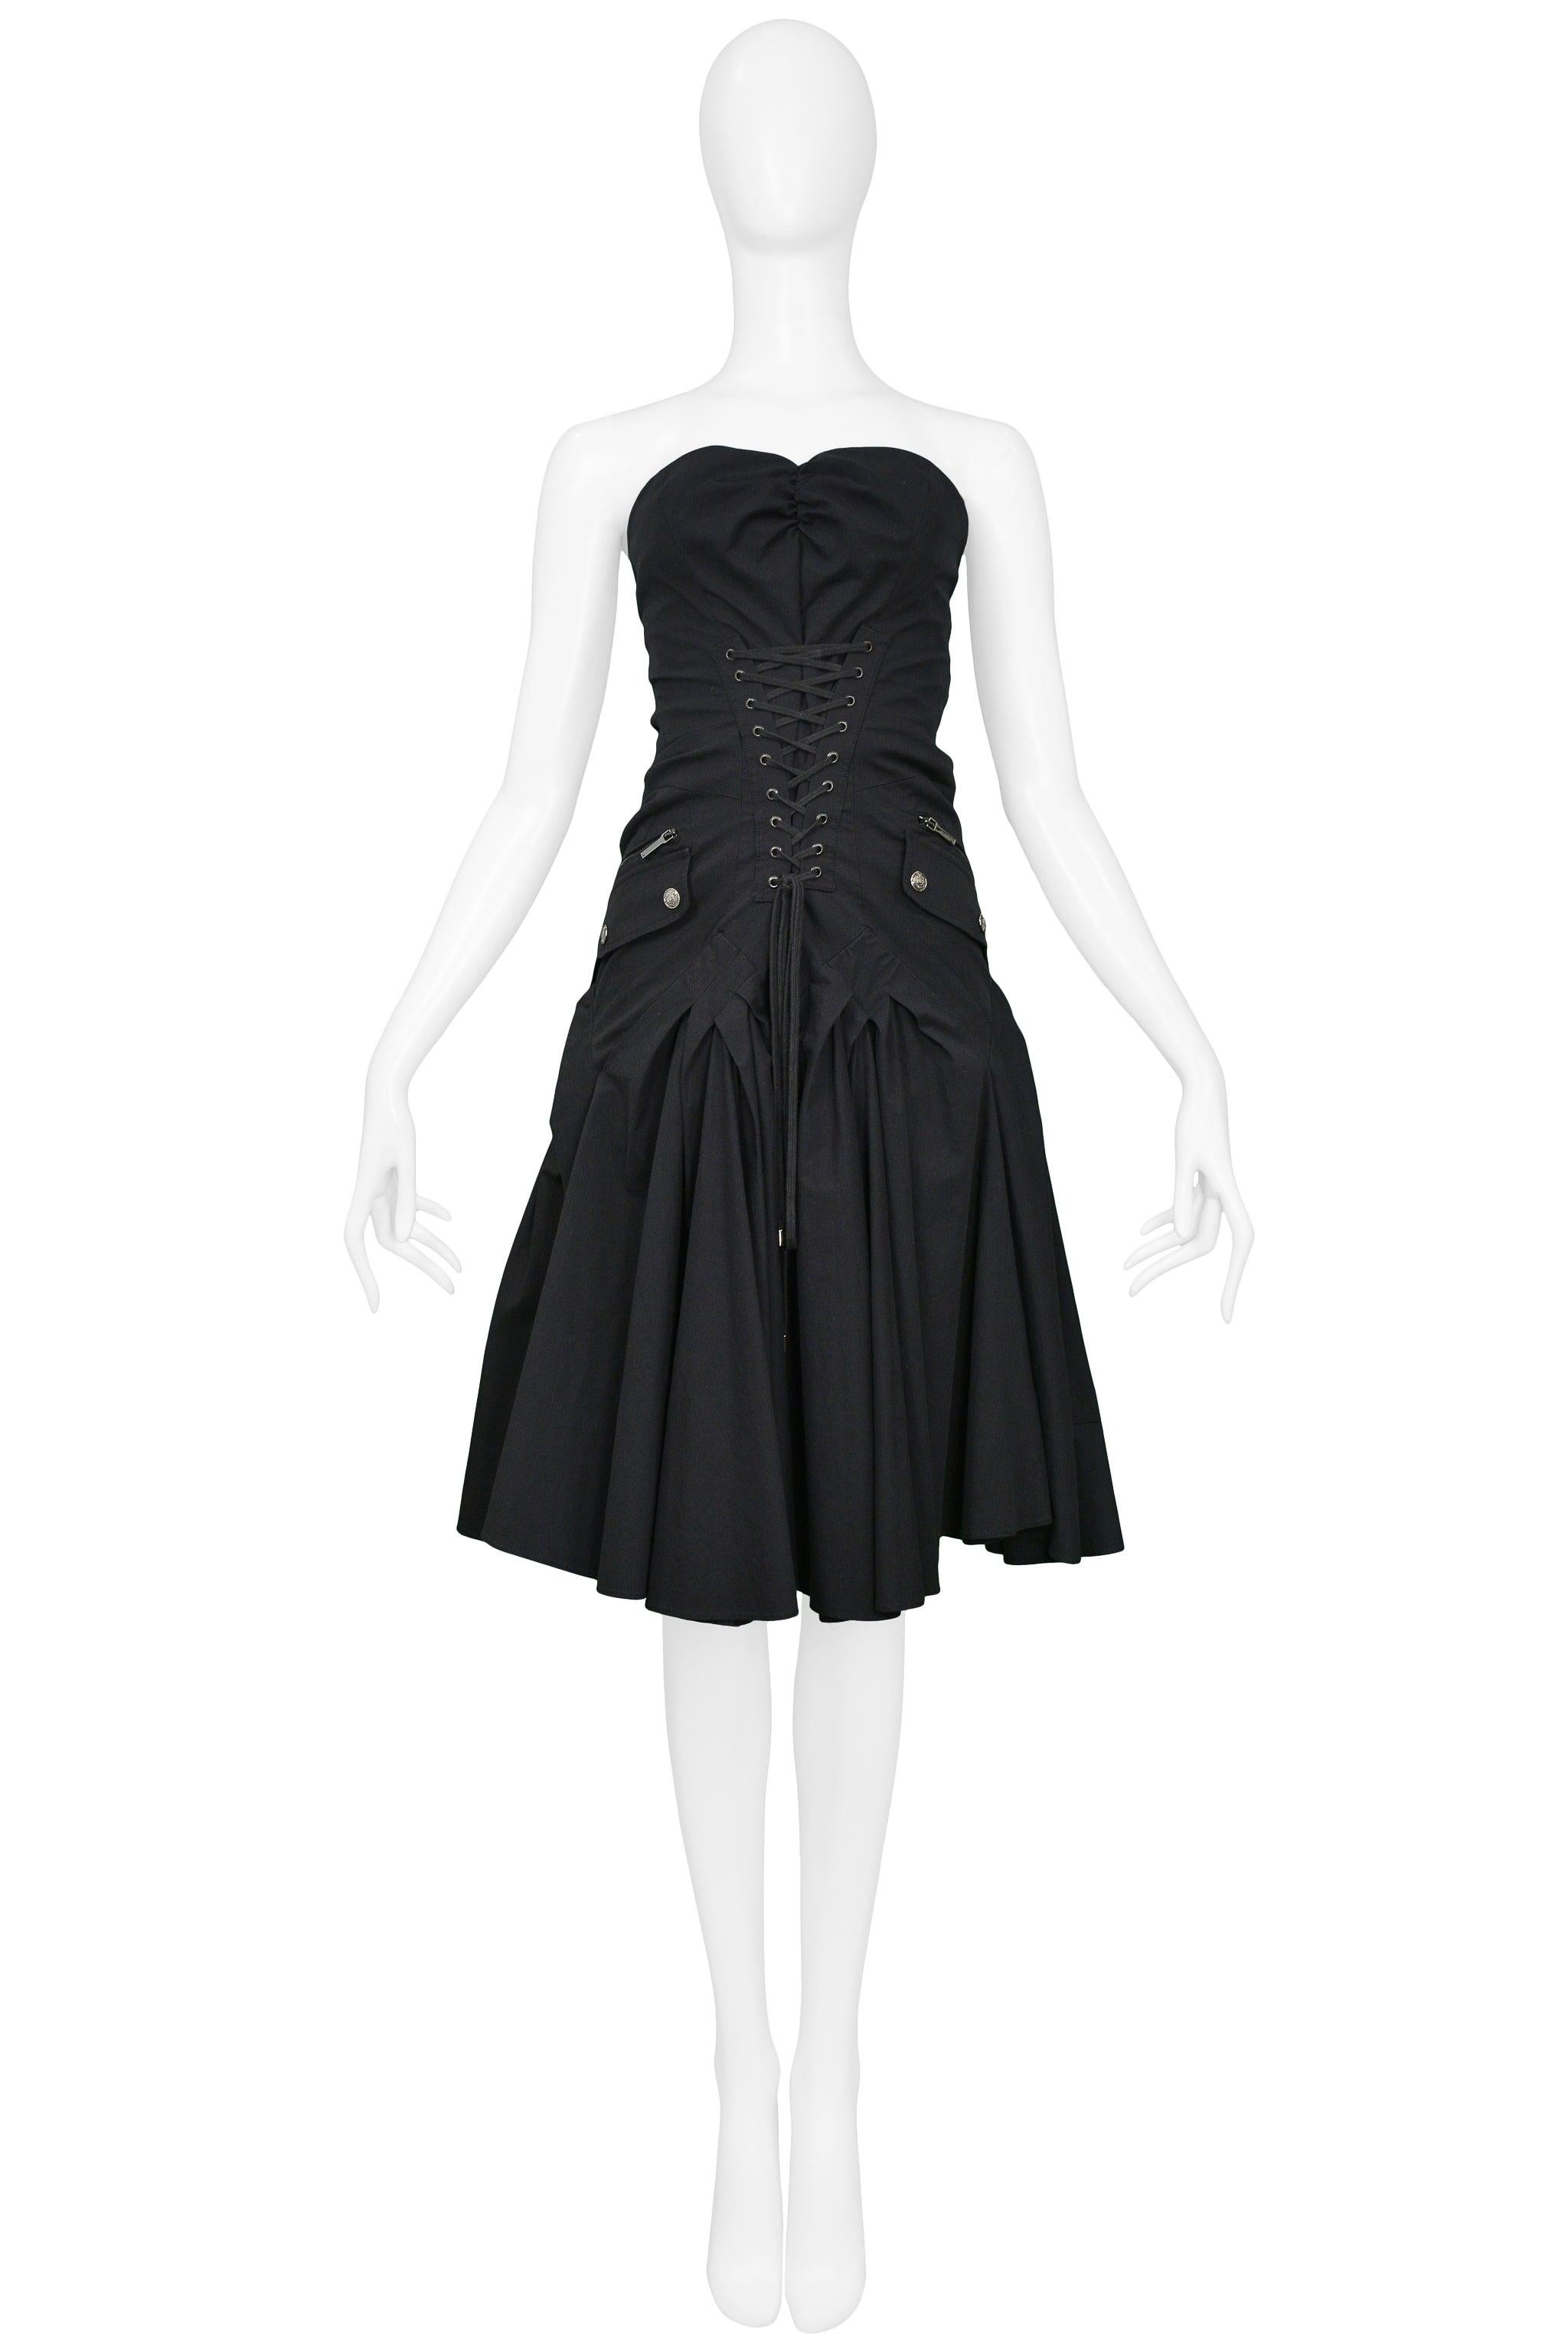 Resurrection Vintage is excited to offer a vintage Christian Dior by John Galliano black cotton strapless cargo dress with corset bodice, zipper pockets, and snap side cargo pockets. 

Christian Dior, Paris
Size 40
Measurements: Bust 33